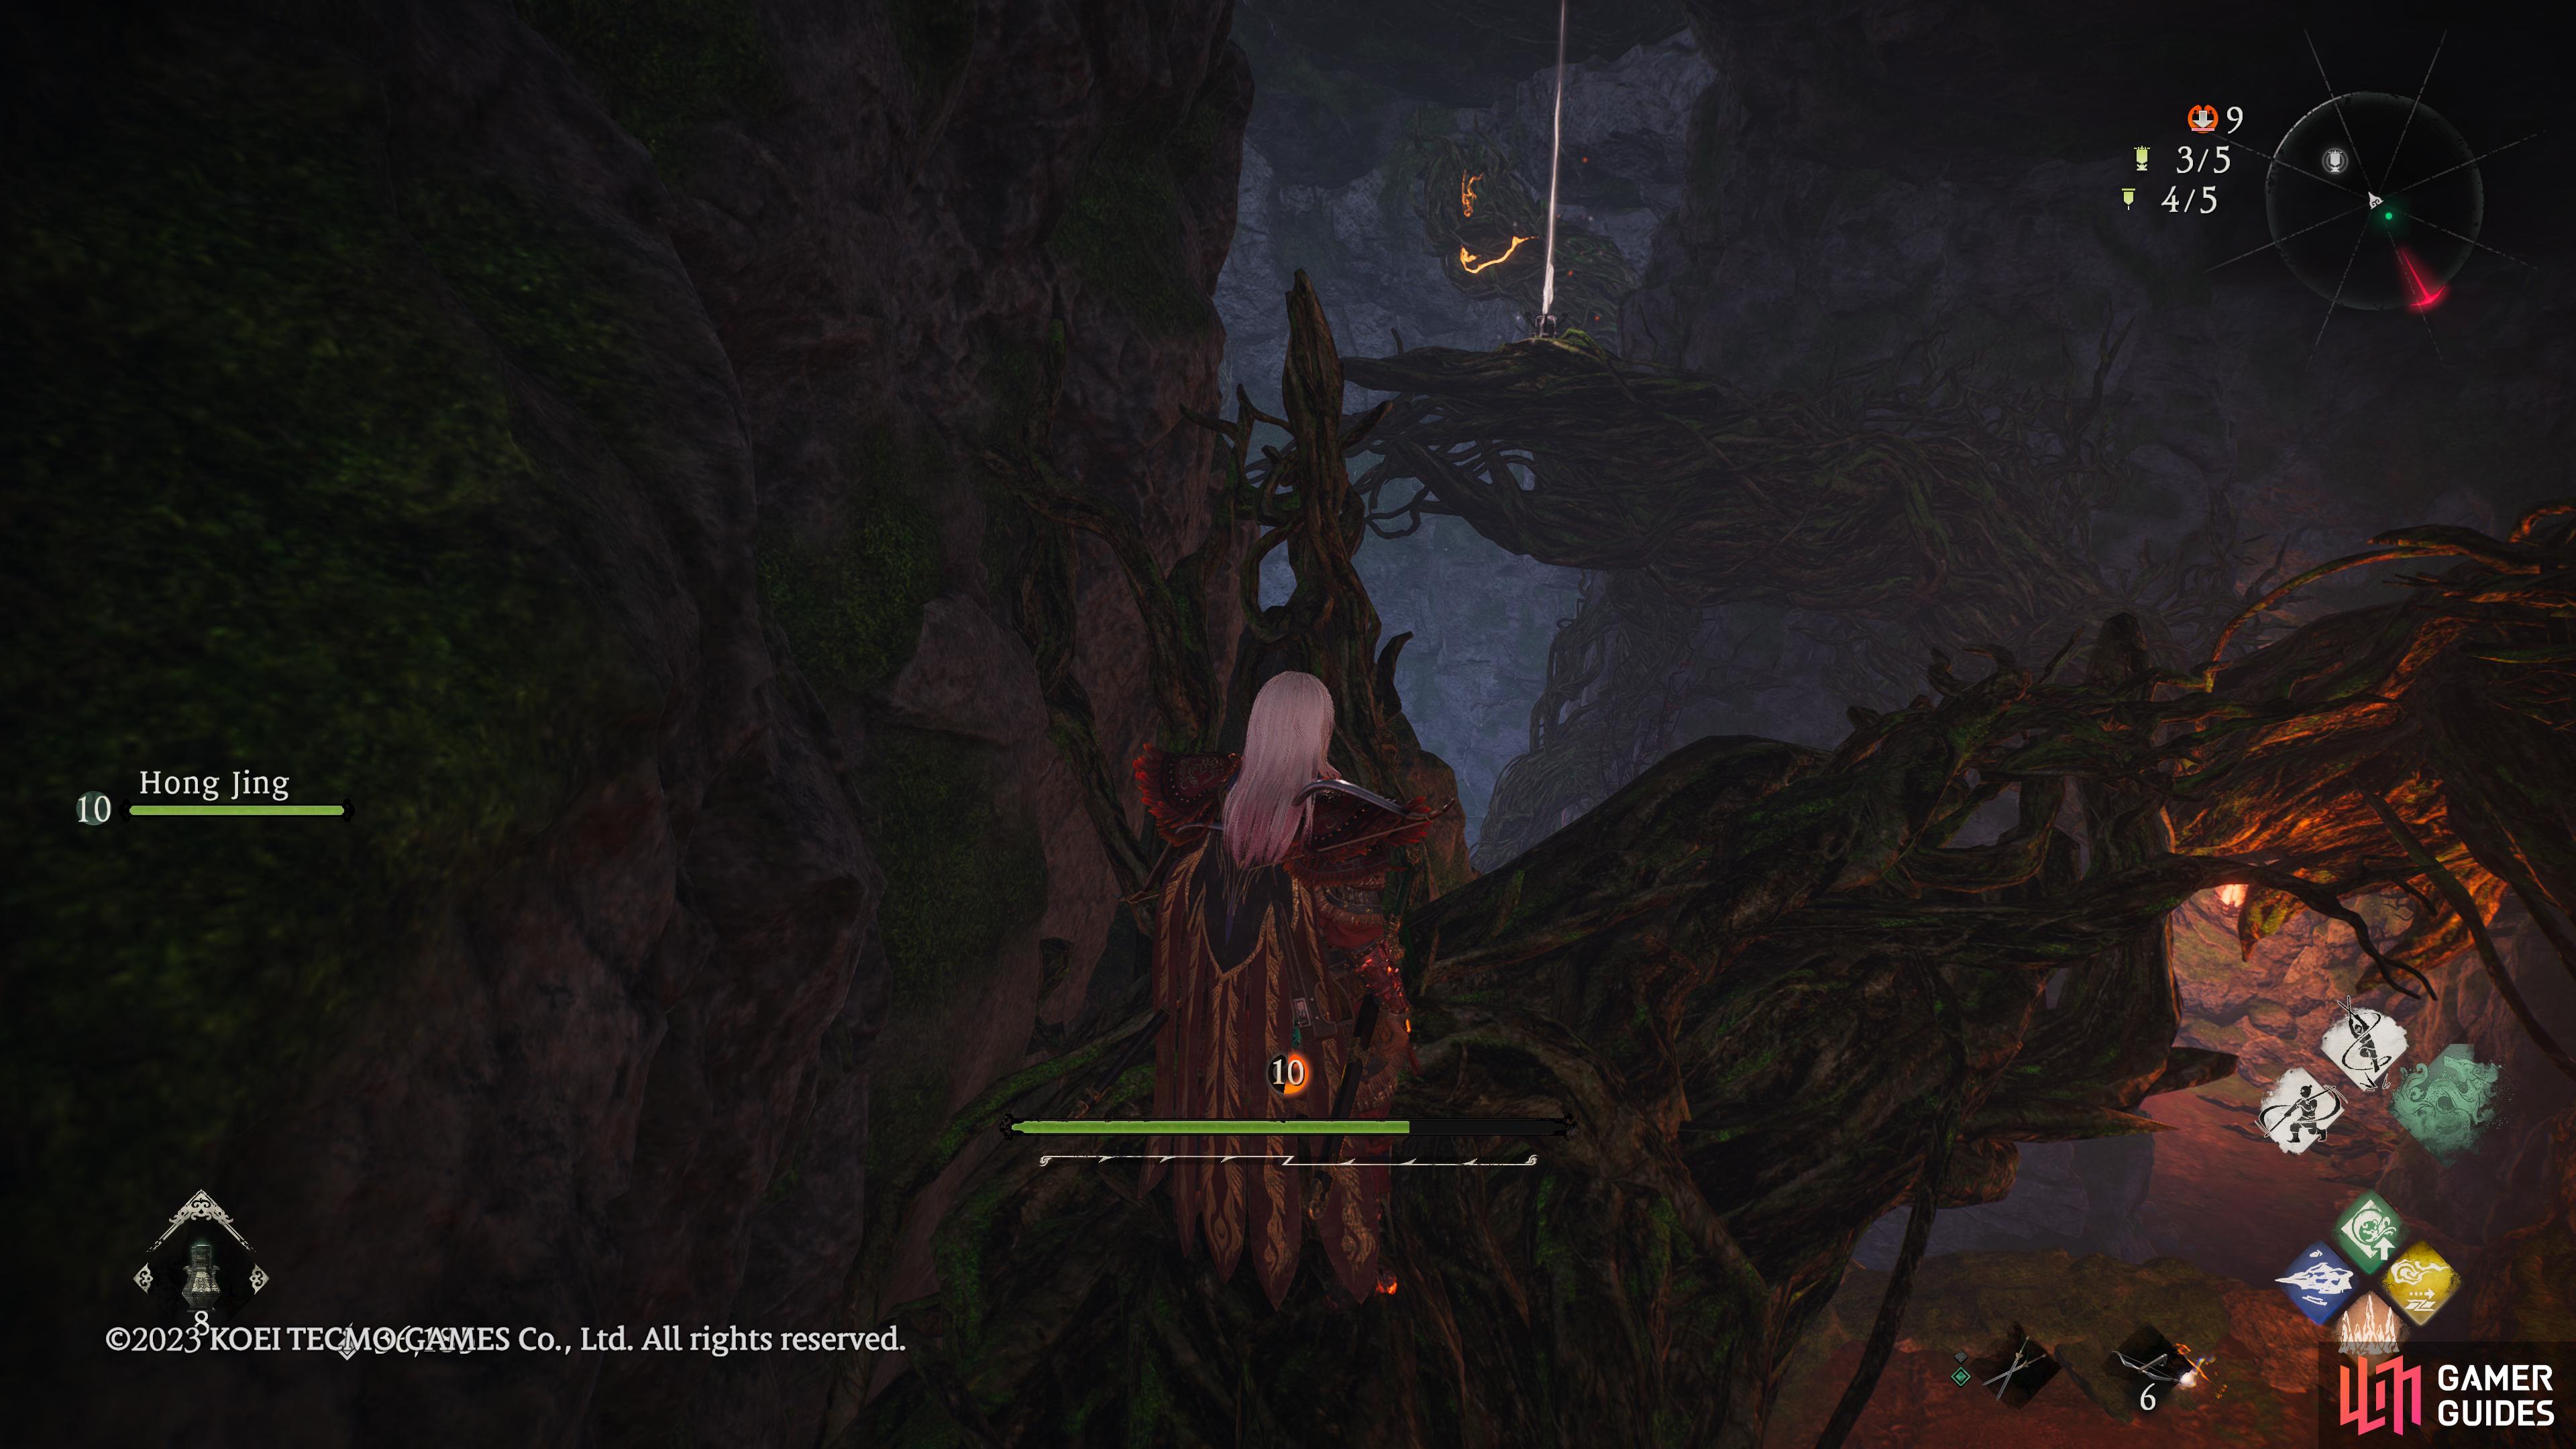 You can find this marking flag on a branch in the cave.